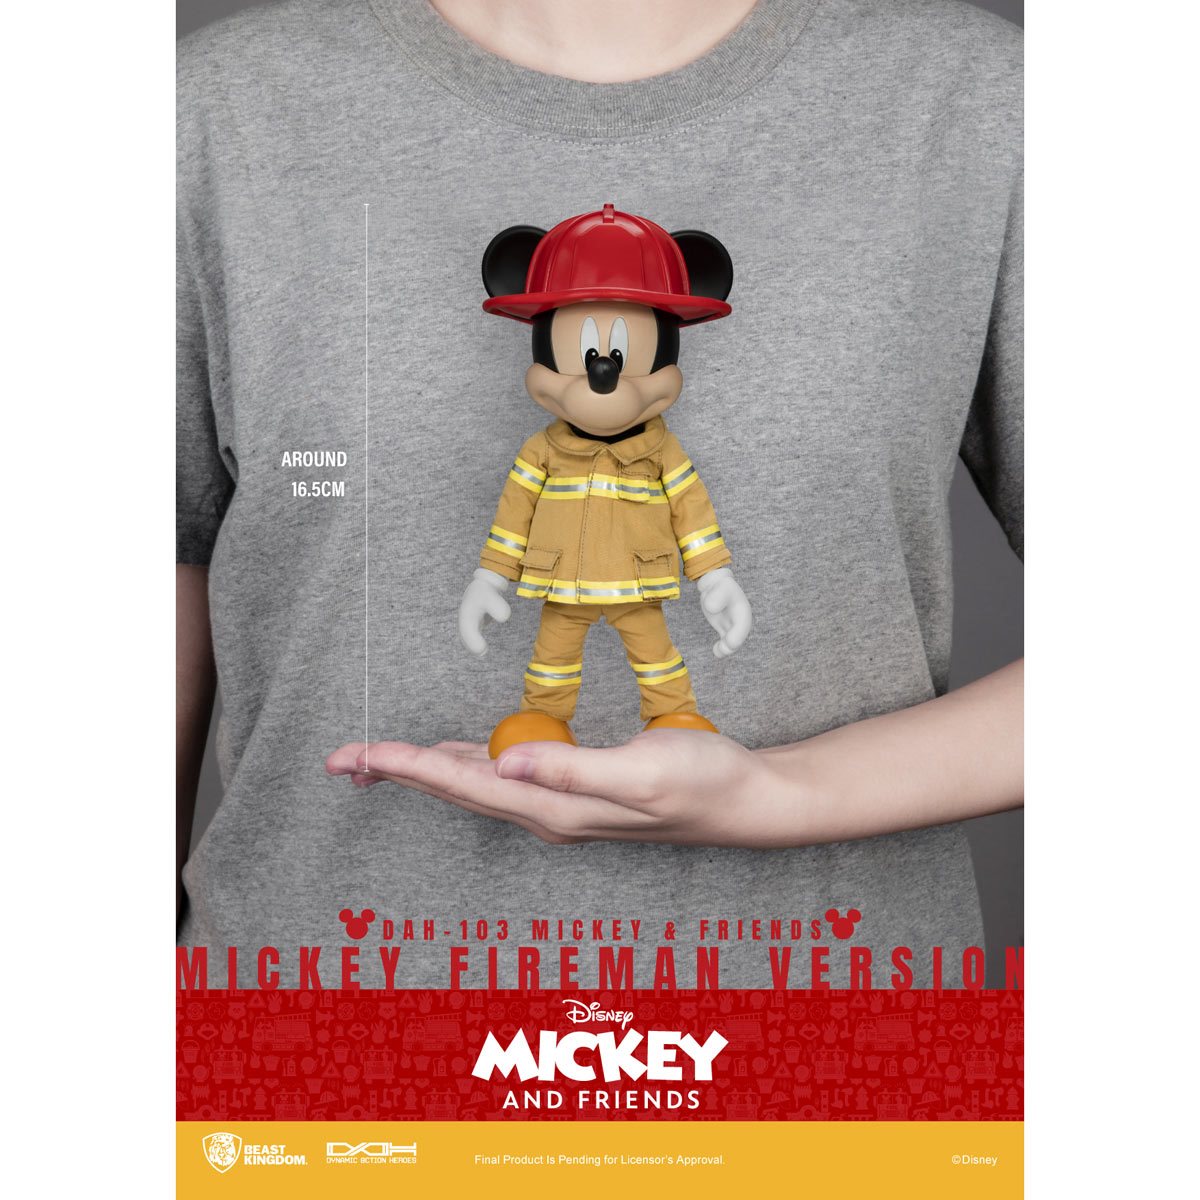 and Heroes Action Figure Dynamic Mouse 8-Ction Fireman Mickey Friends Mickey DAH-103